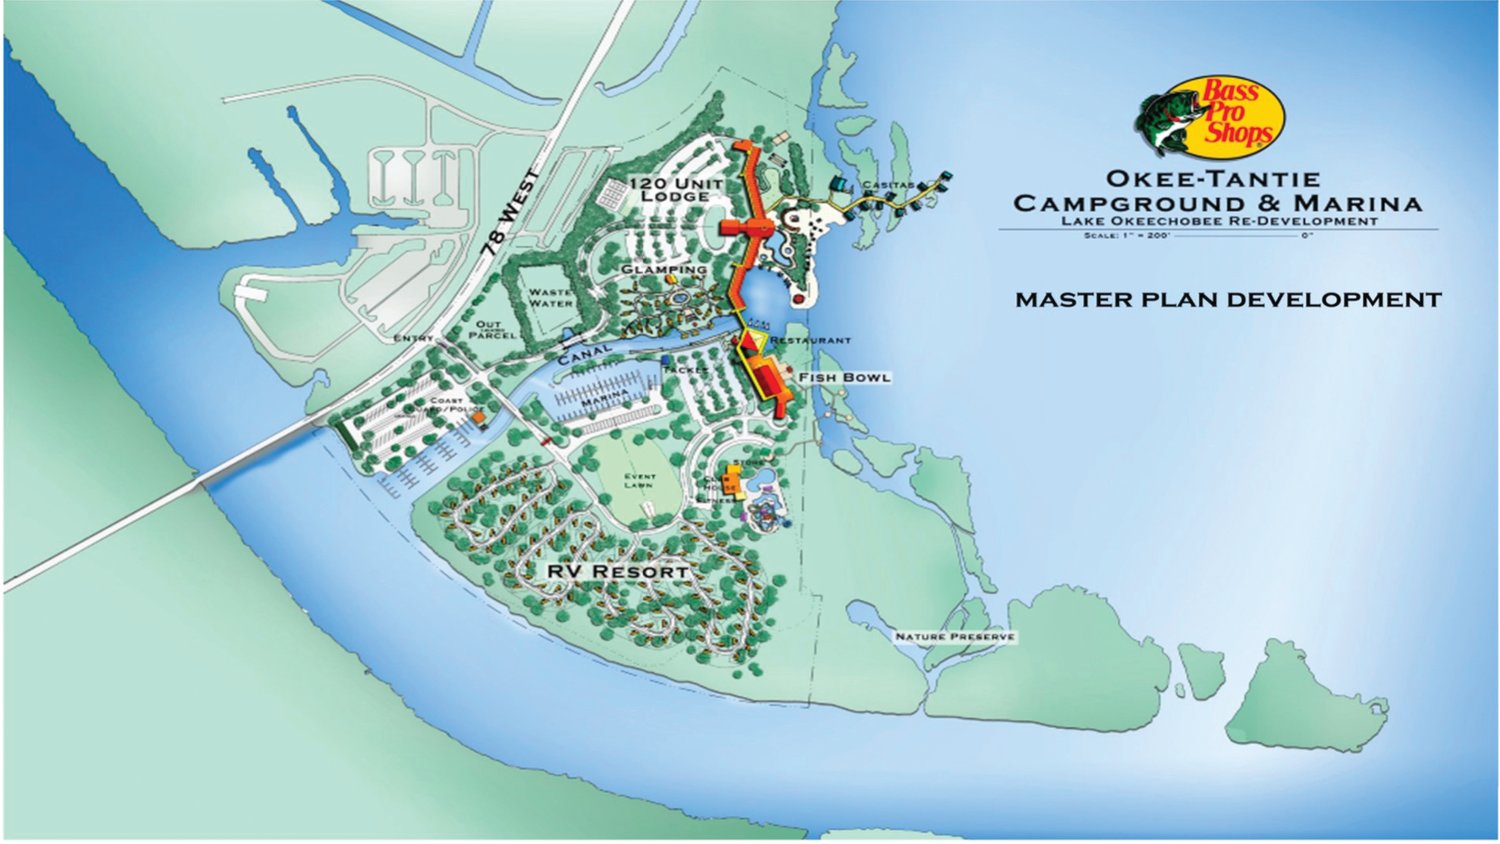 A master plan for the Okee-Tantie recreation area is under development.